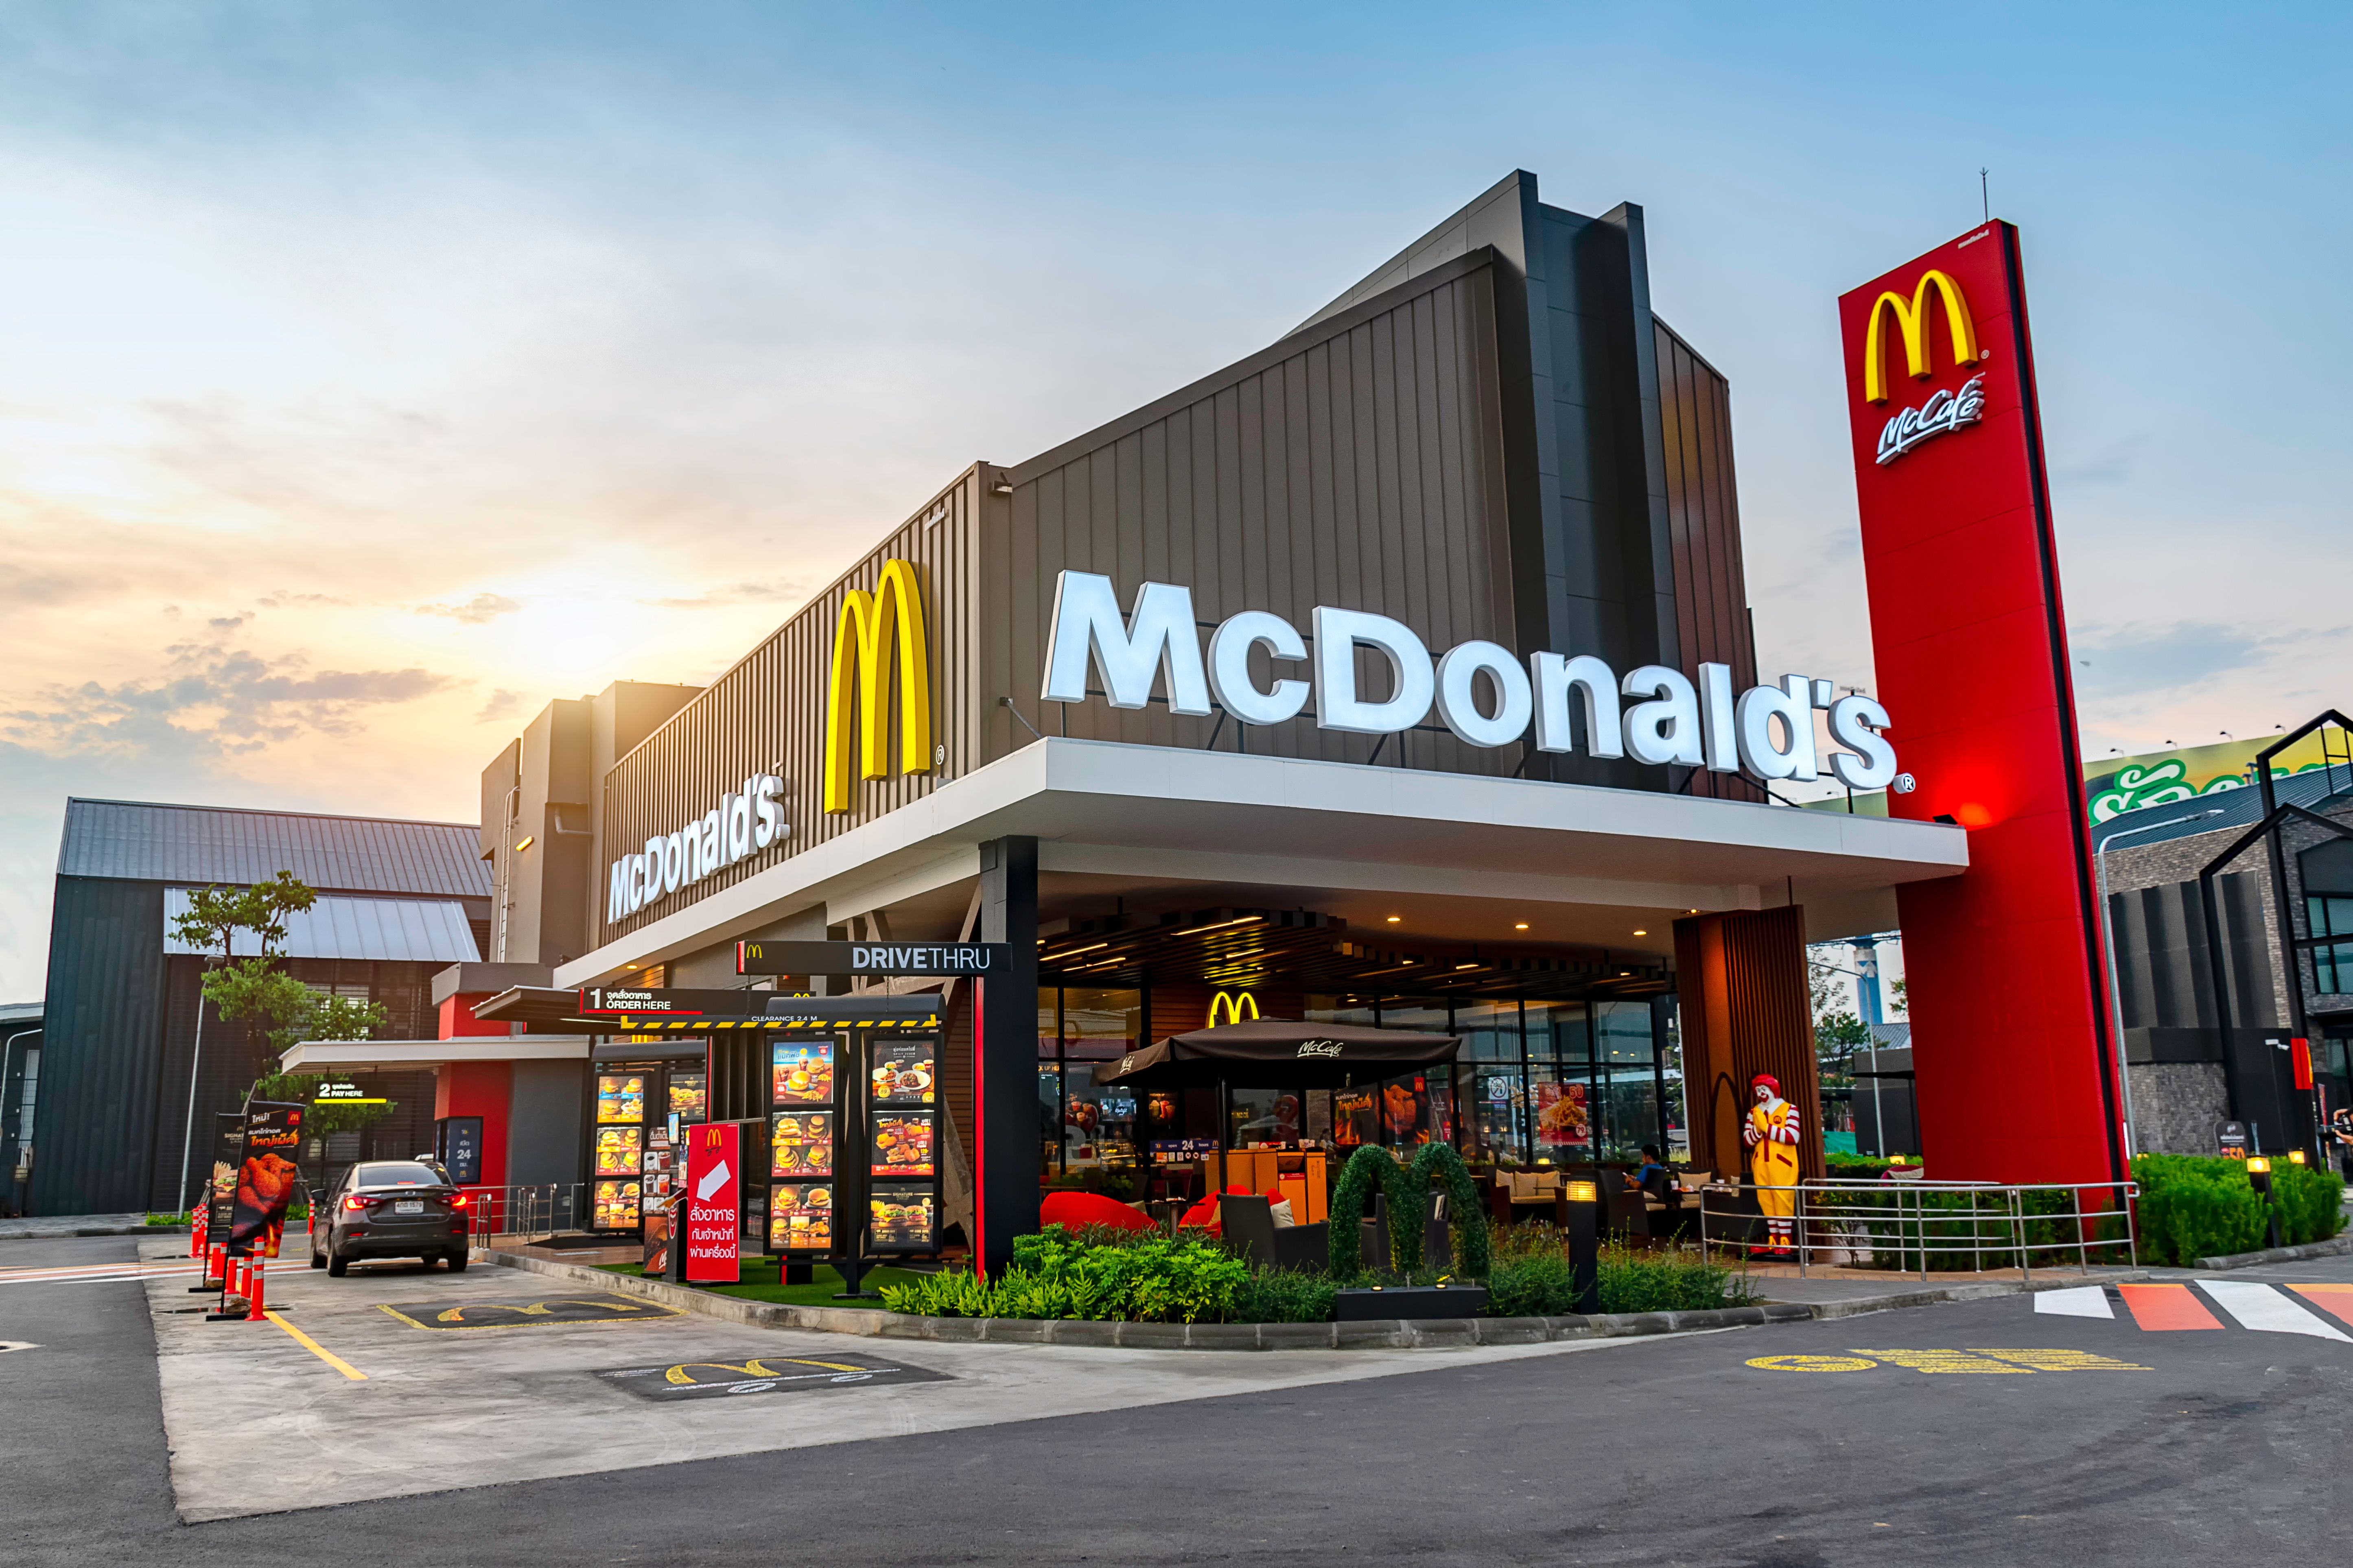 A fast-food franchise McDonald's Restaurant located in Ayutthaya, Thailand. | Source: Shutterstock 